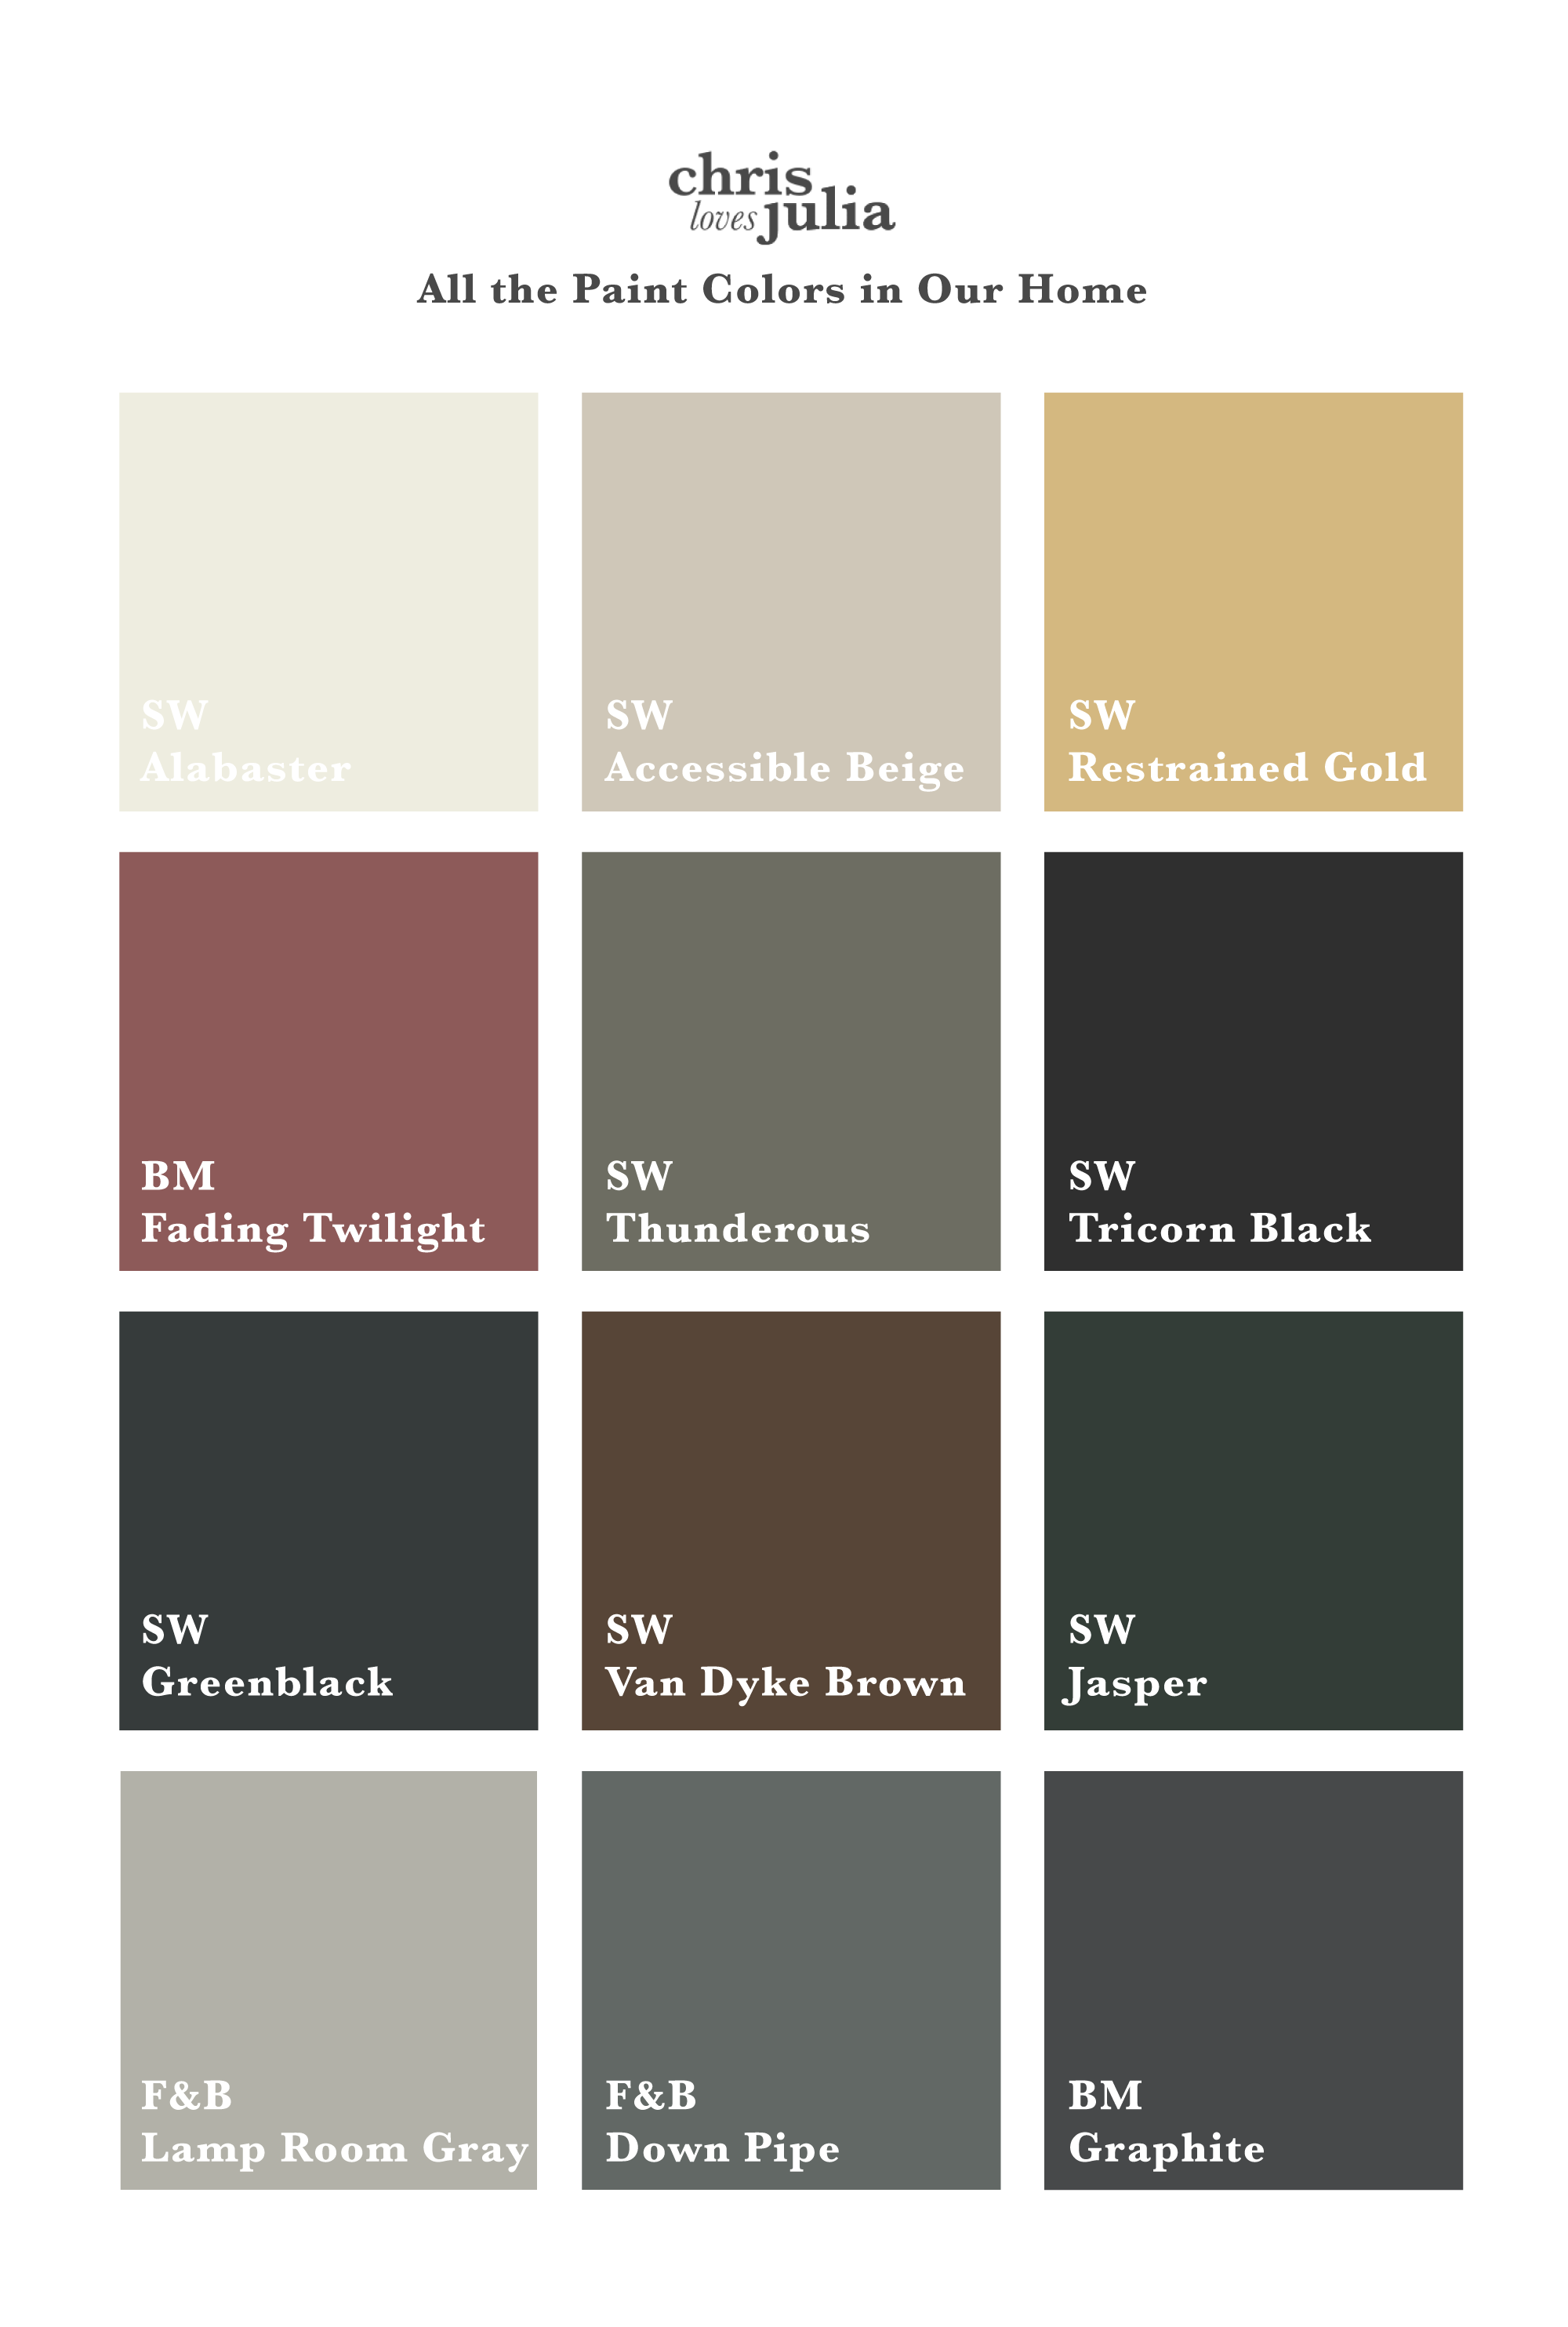 How I create a Home Color Palette + All the paint colors in our